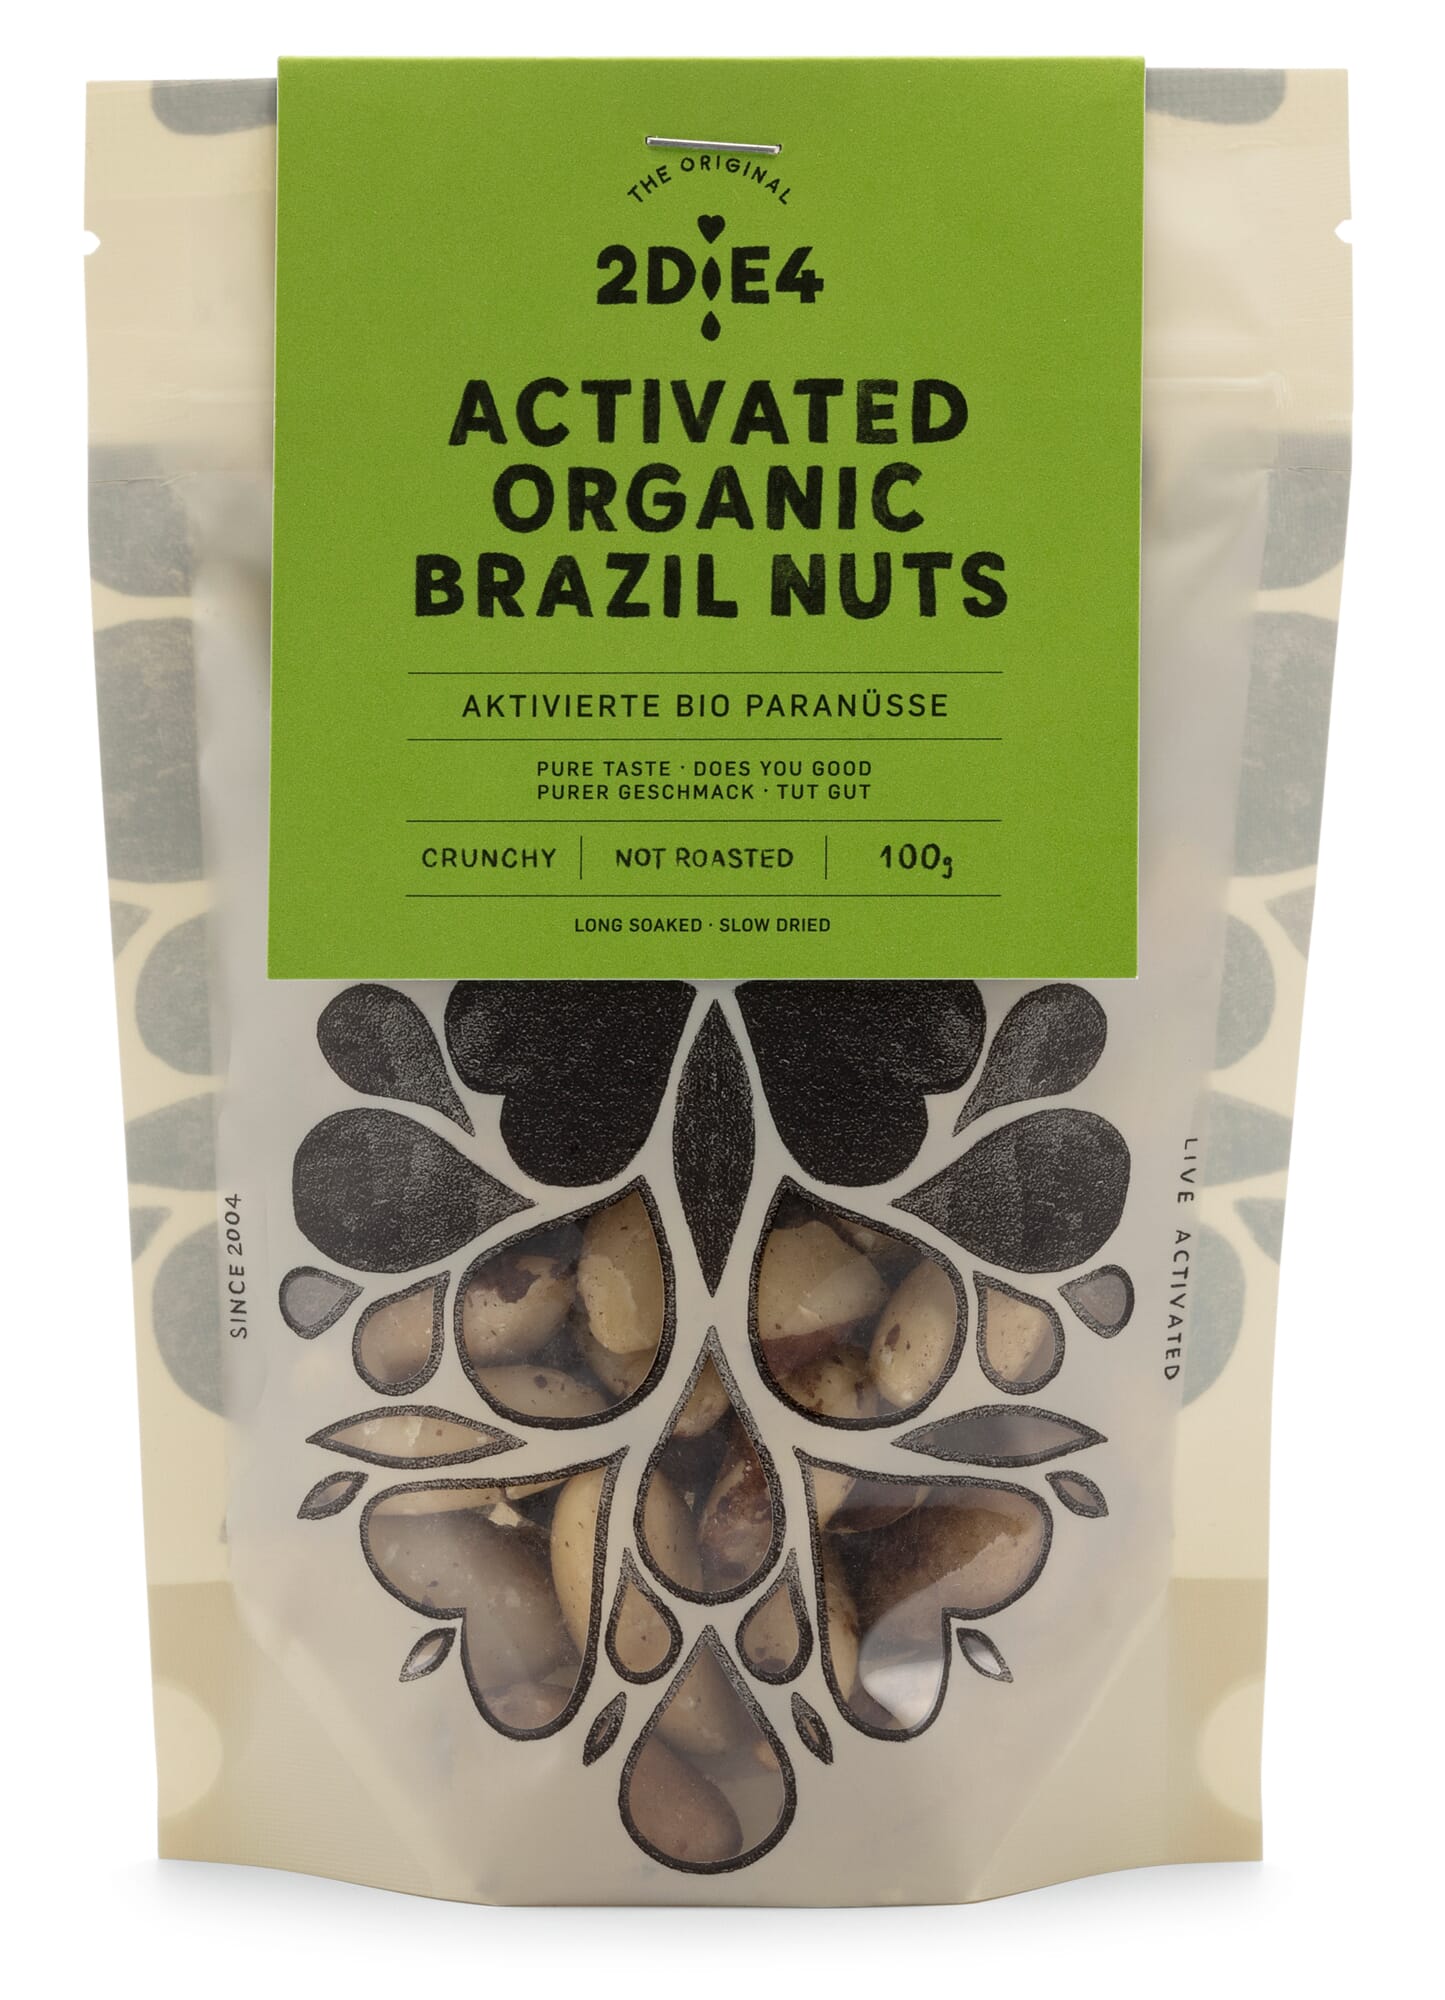 Organic Brazil nuts activated